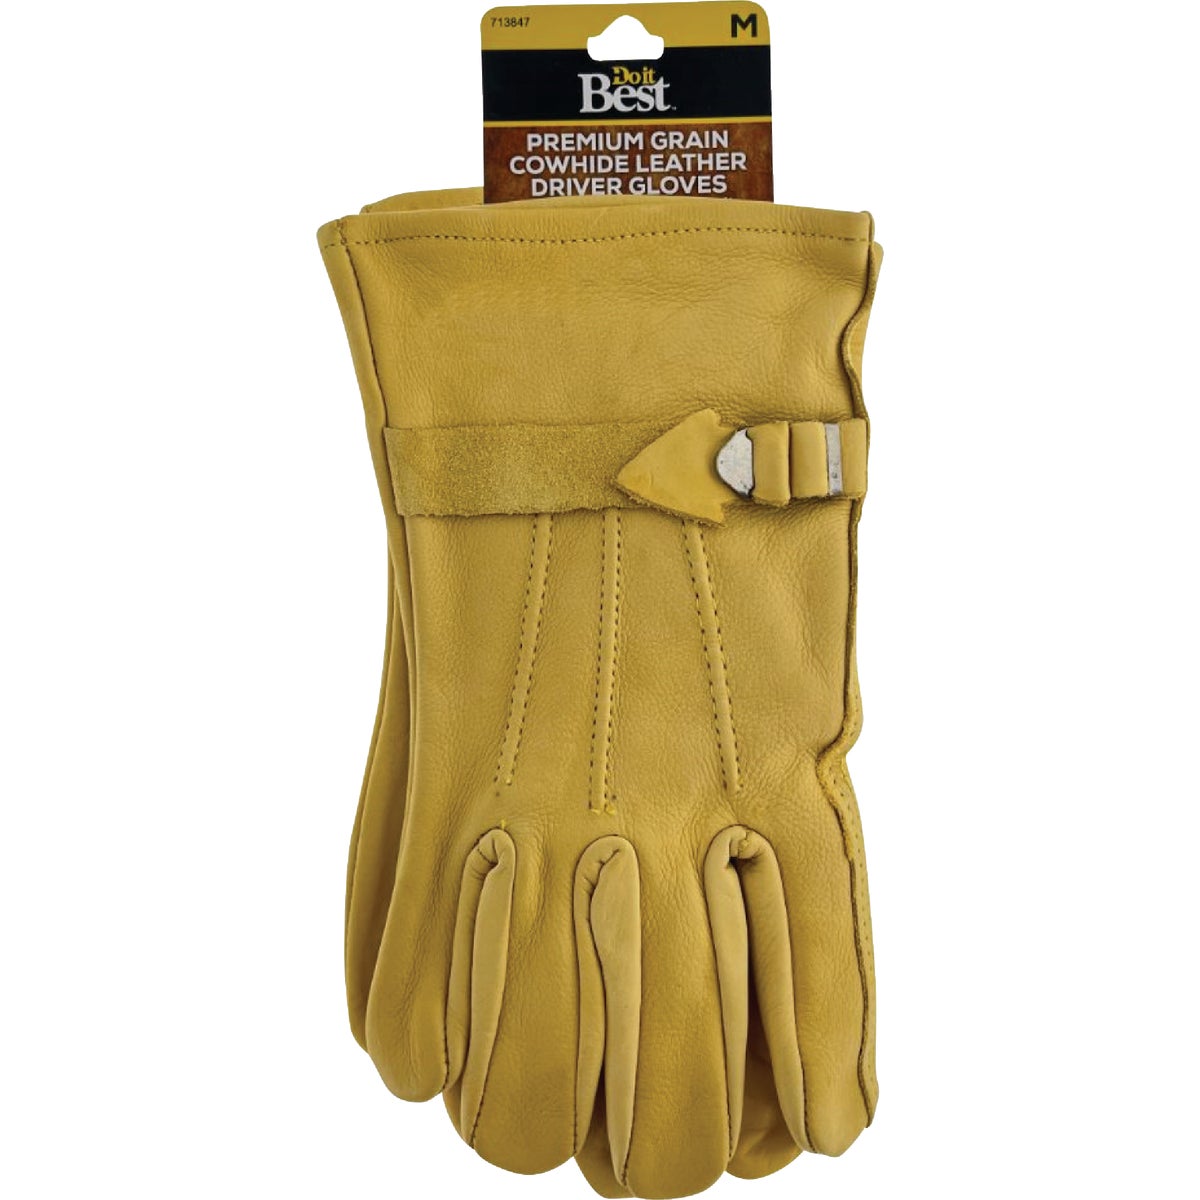 Item 713847, Prime tan grain cowhide leather driver glove. Slip on drivers style.